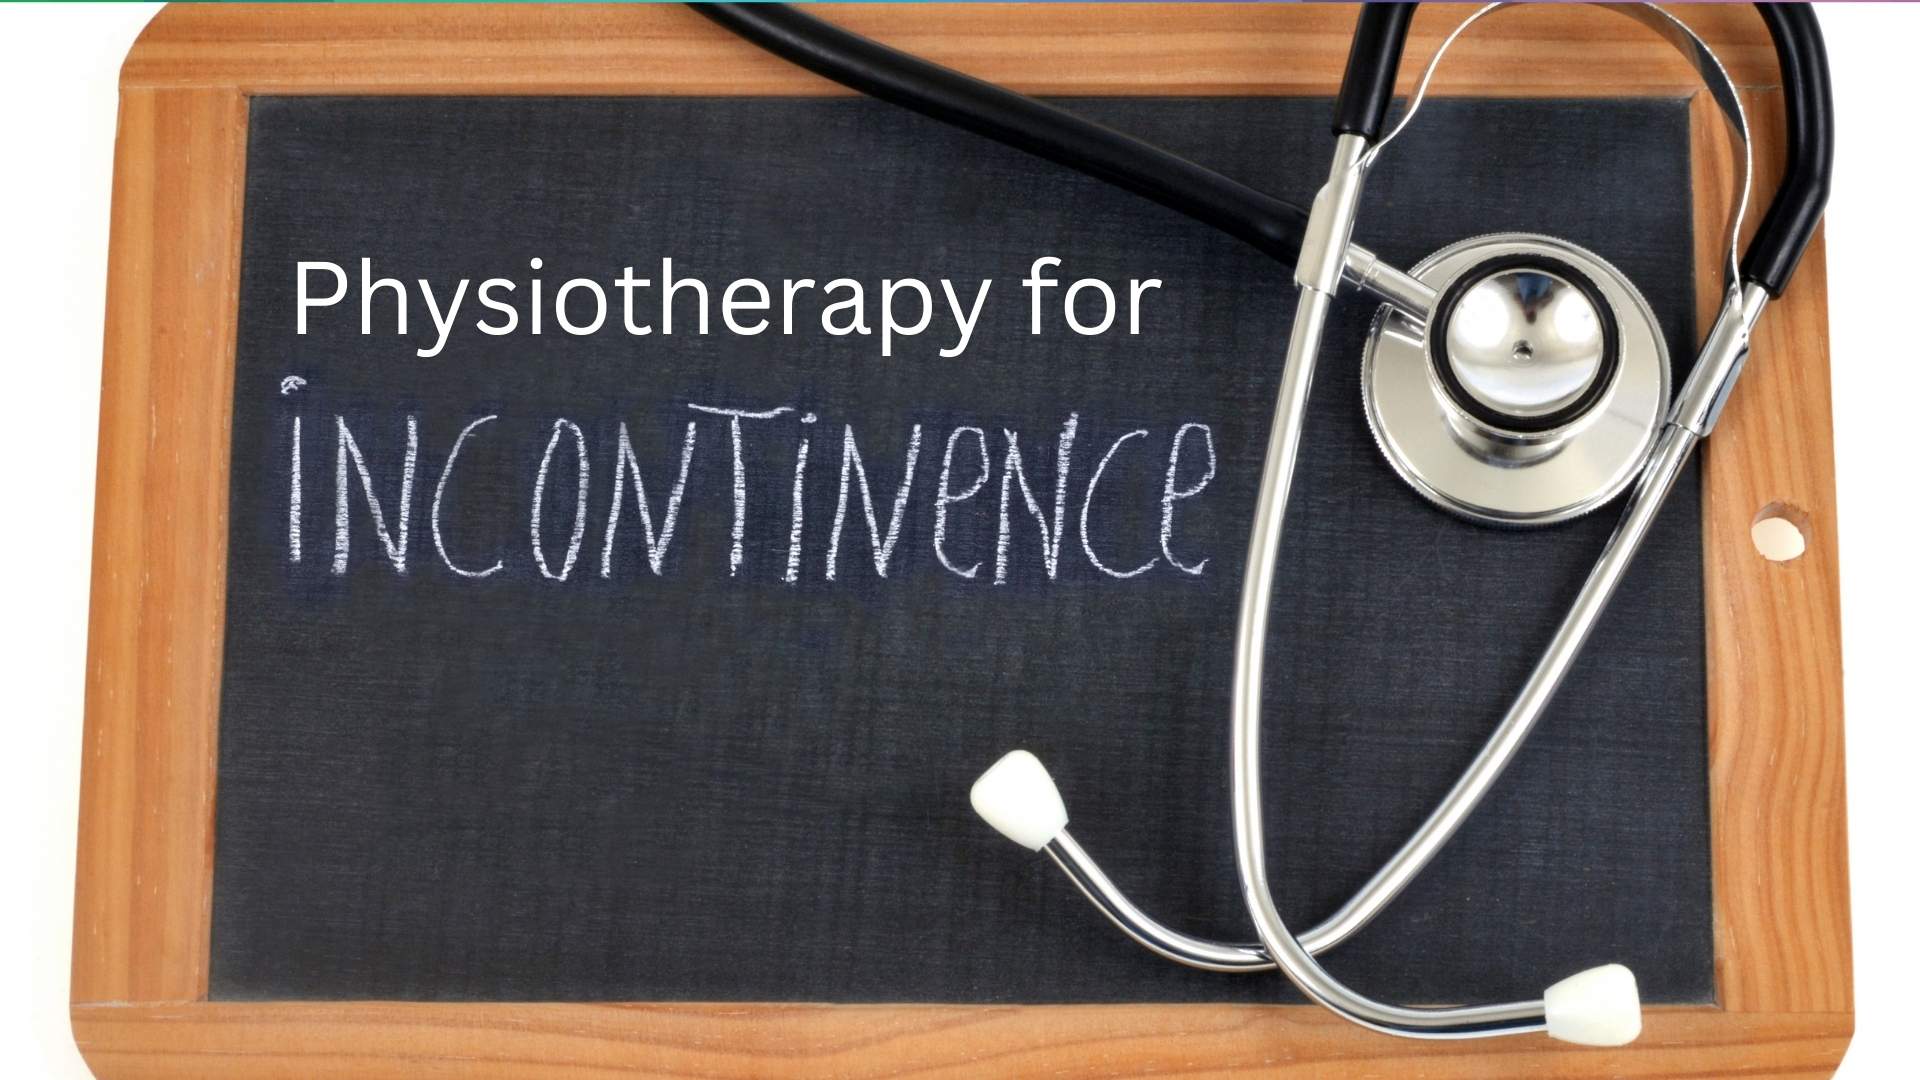 Physiotherapy for Incontinence